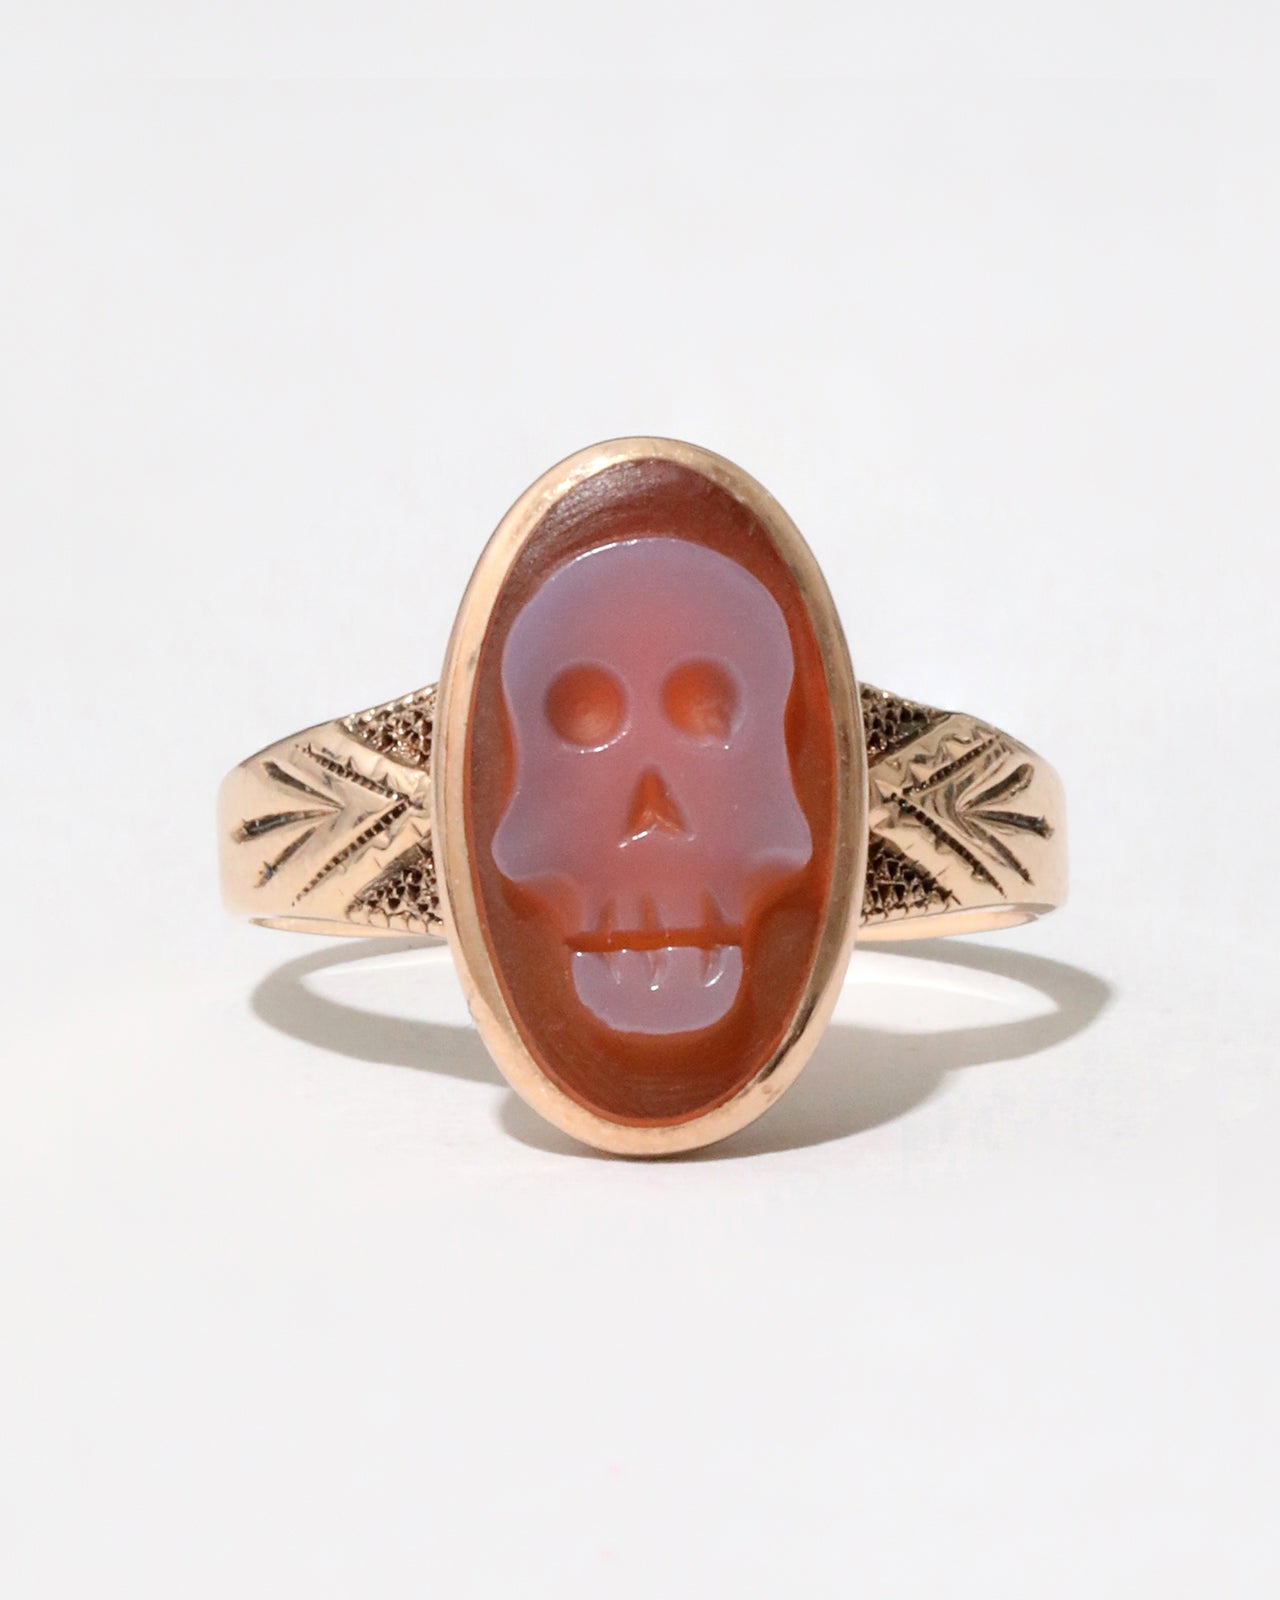 Antique Carnelian and 14k Gold Memento Mori Ring with Chevron Shoulders - Photo 2